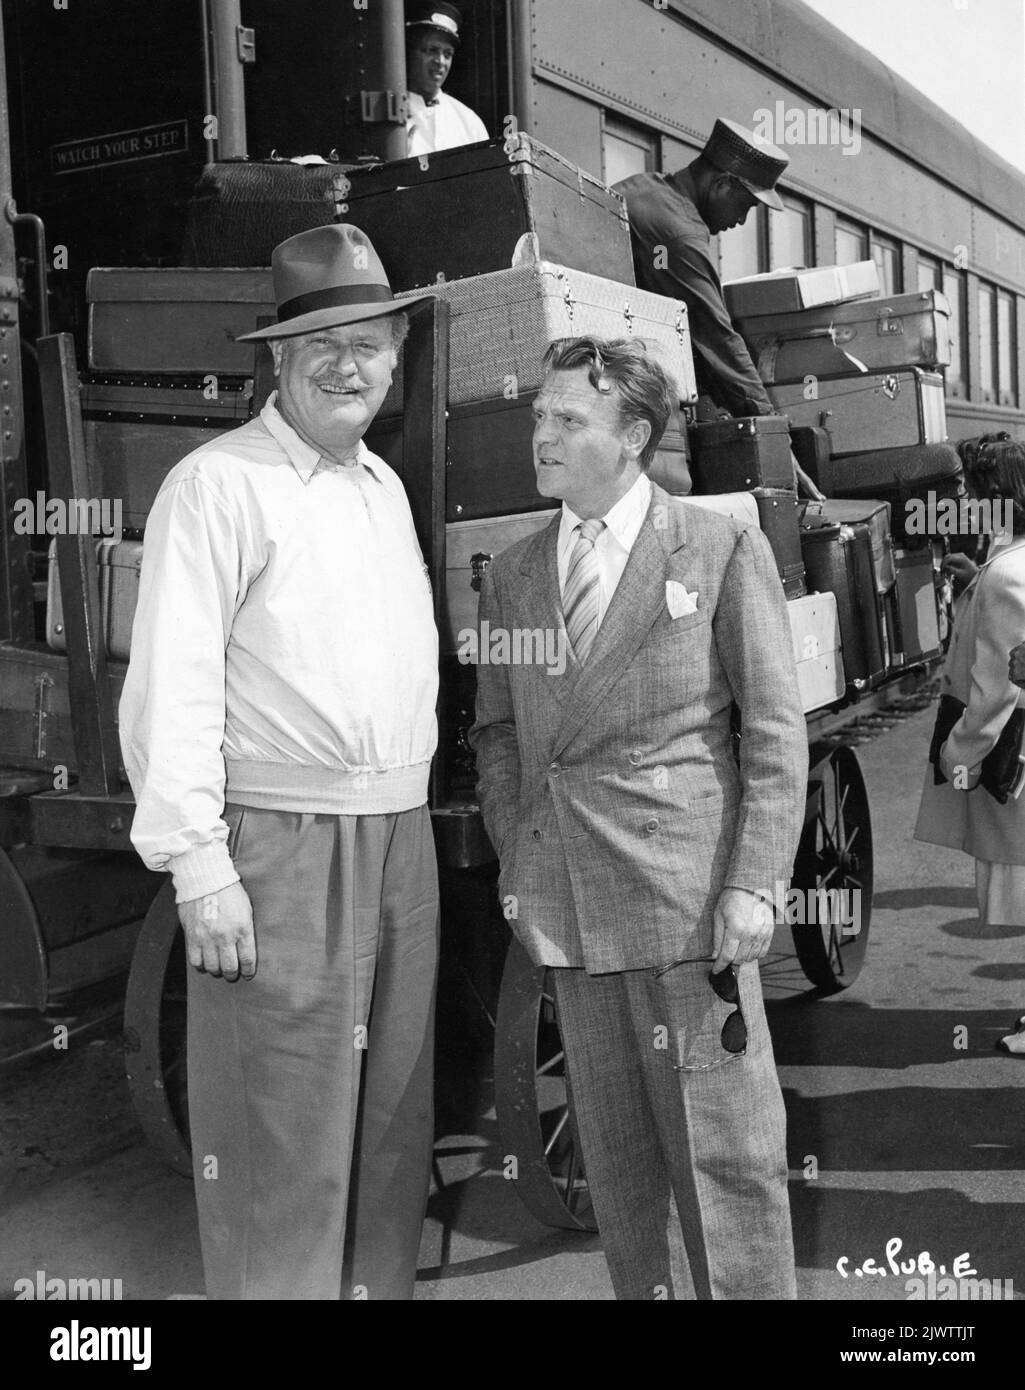 ALAN HALE and JAMES CAGNEY on arrival at Pasadena train station after one month location trip in Canada filming CAPTAINS OF THE CLOUDS 1942 director MICHAEL CURTIZ music Max Steiner associate producer William Cagney Warner Bros. Stock Photo